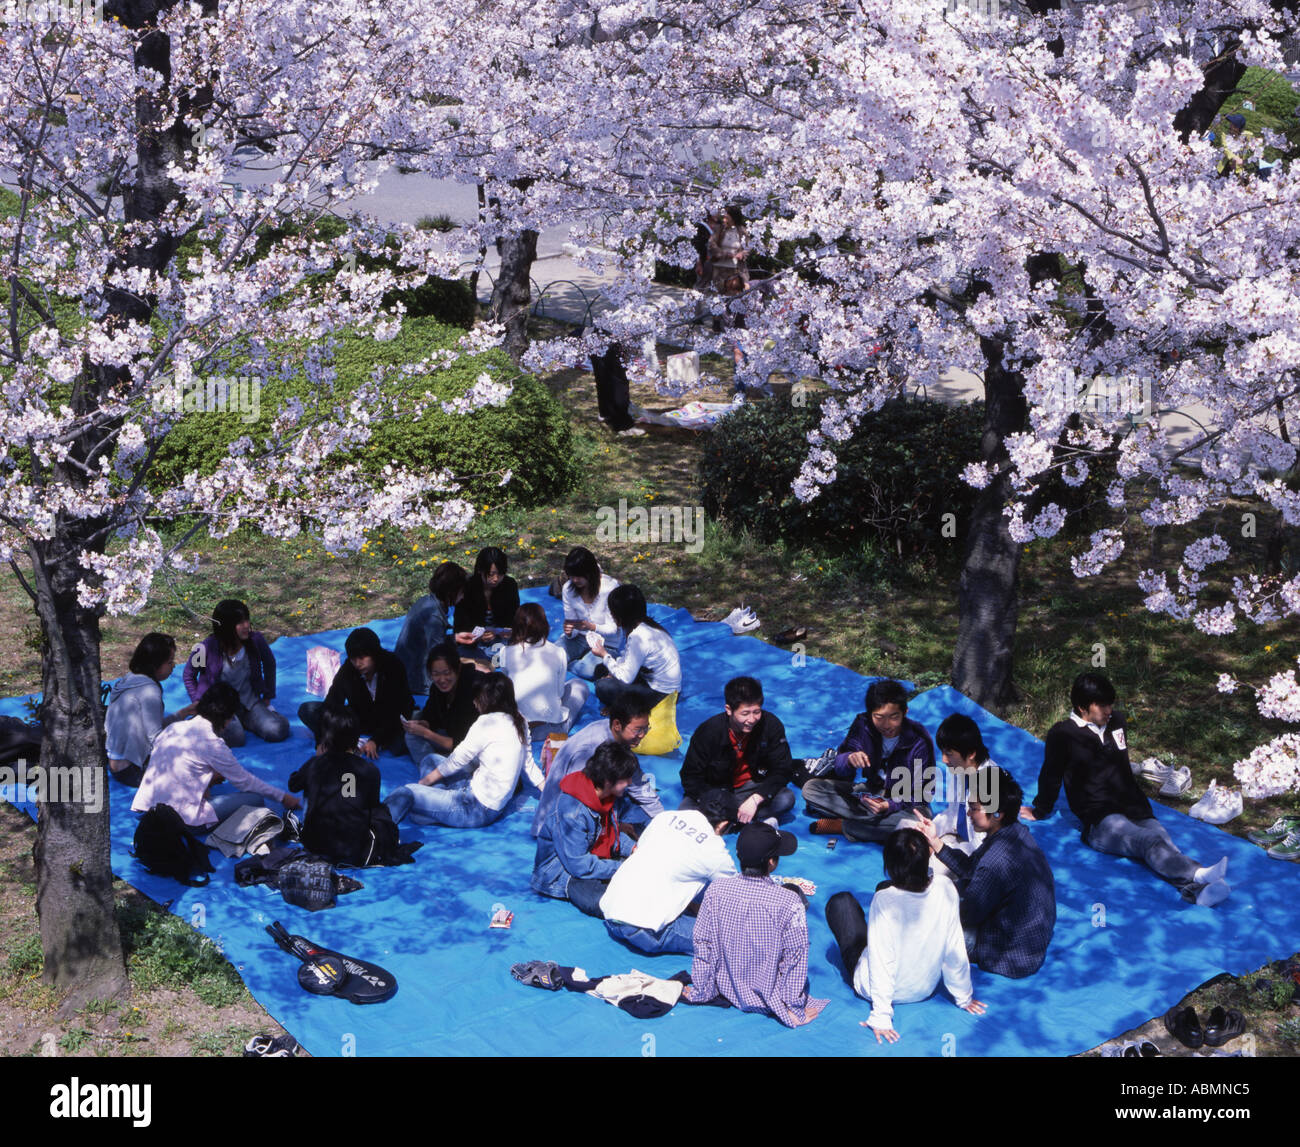 Japanese people enjoying a cherry blossom viewing party in the grounds of Osaka castle Stock Photo